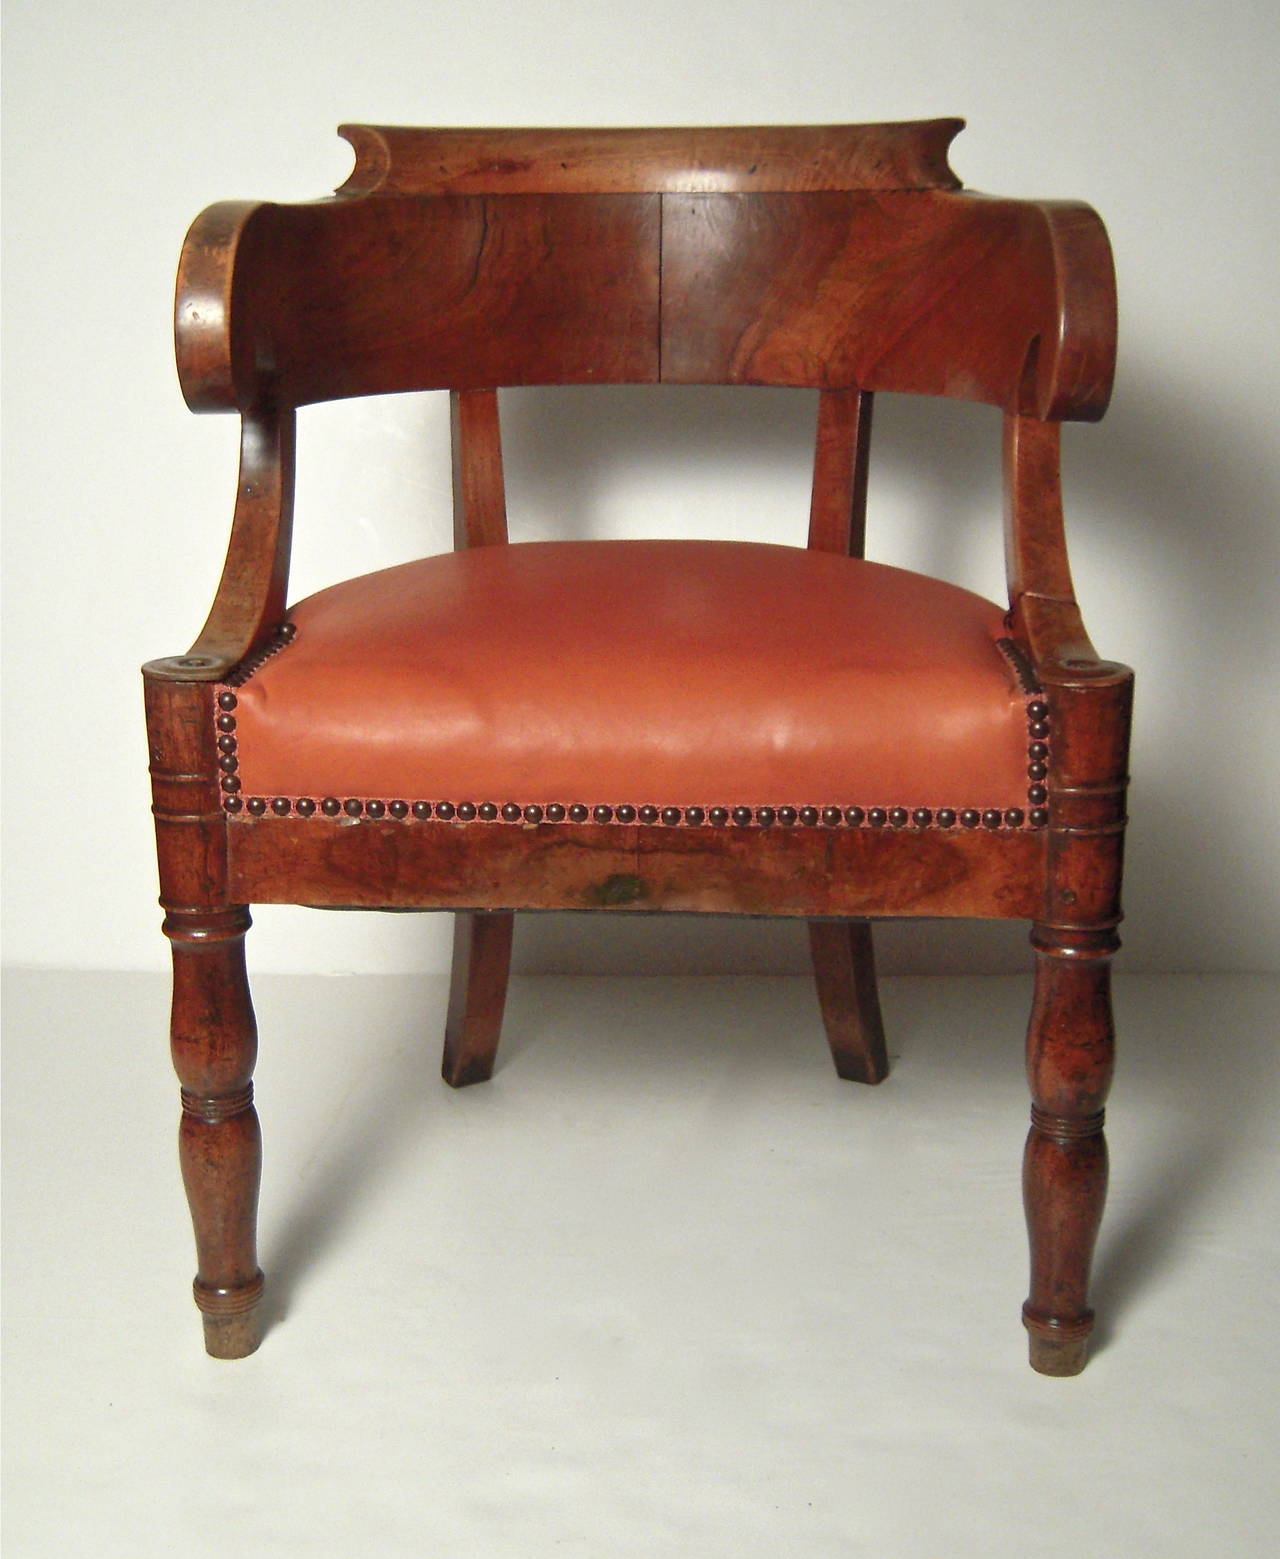 A French Empire period arm chair, of wonderful sculptural form in richly figured and carved walnut, the curved back with scrolled arms over downswept supports, the semi circular leather upholstered seat over baluster turned legs.
Perfect as an